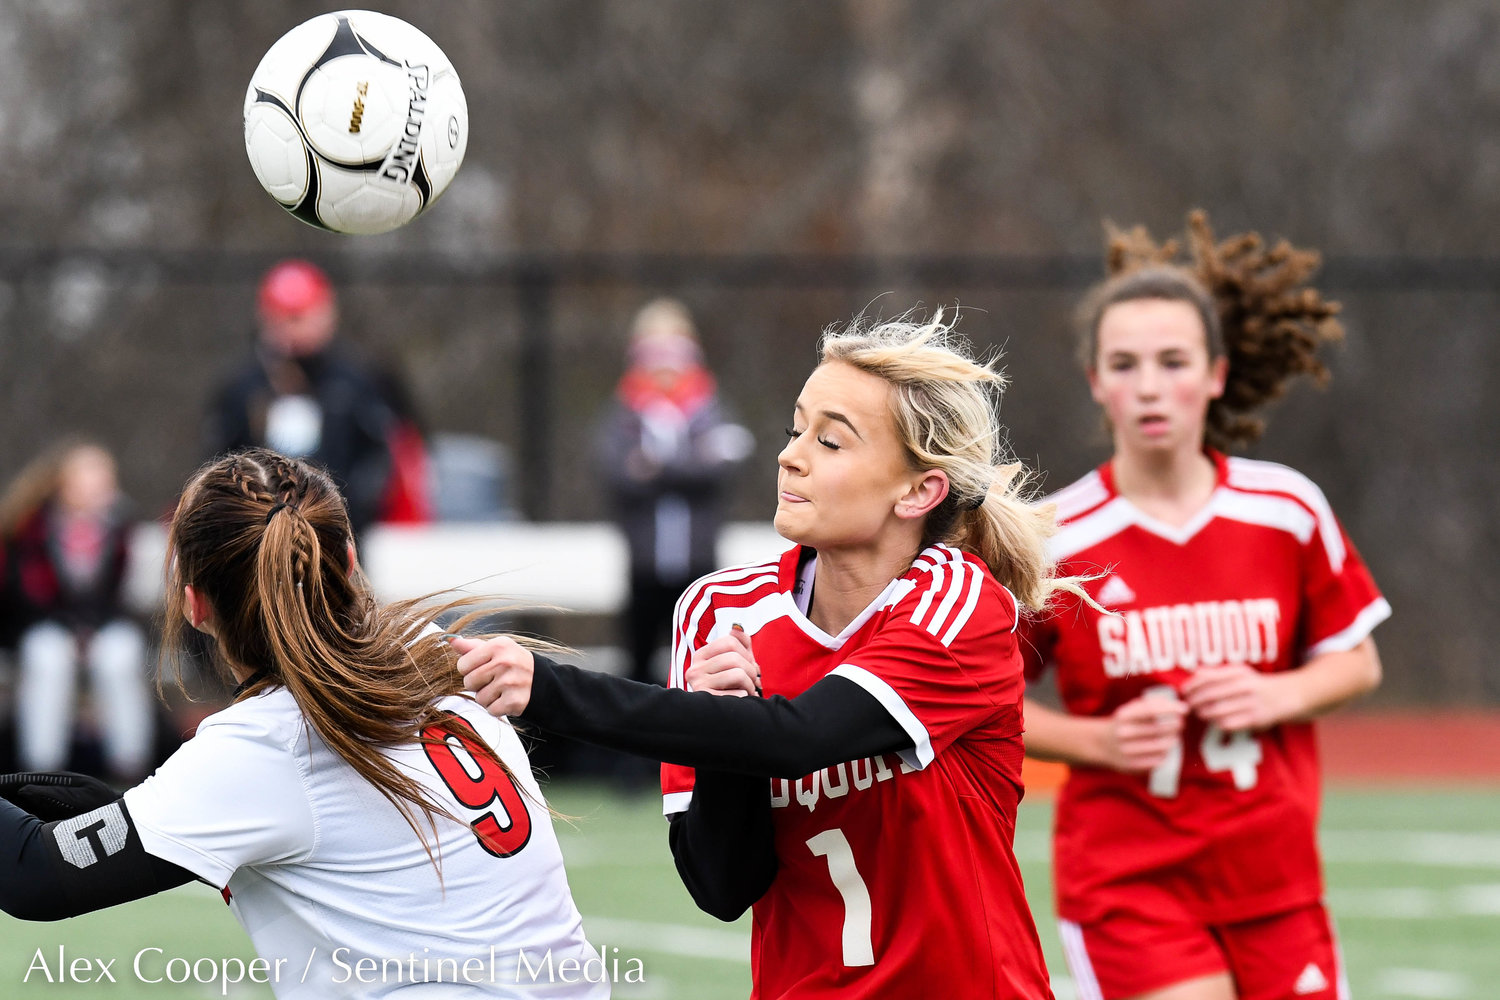 Sauquoit Valley player Paige Kuhn (1) heads the ball against Waterford-Halfmoon player Sophia Belonga (9) during the Class C state final on Sunday at Cortland High School. The Indians lost 6-3.